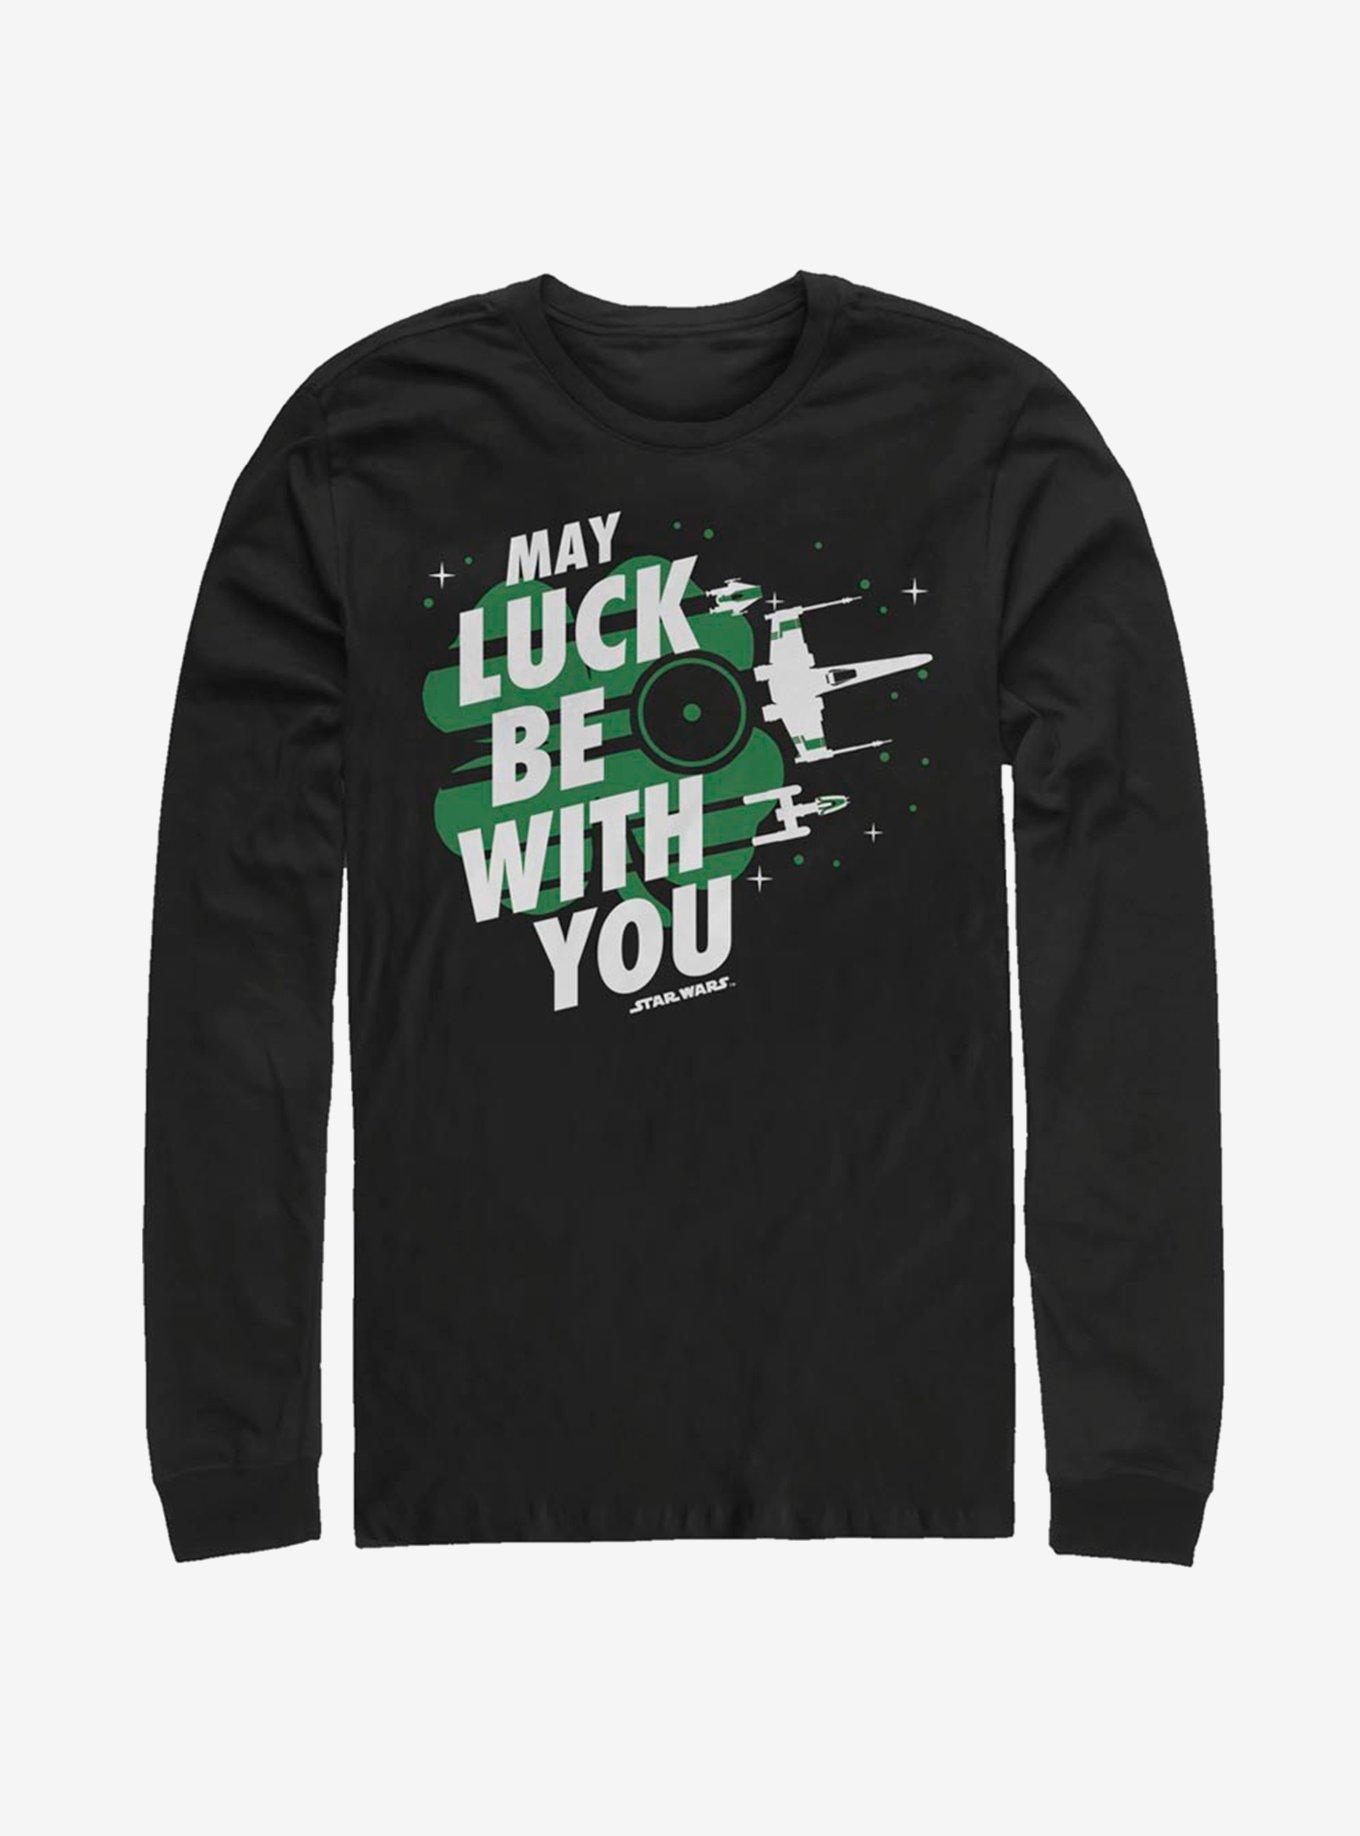 Star Wars Luck Fighters Long-Sleeve T-Shirt, BLACK, hi-res